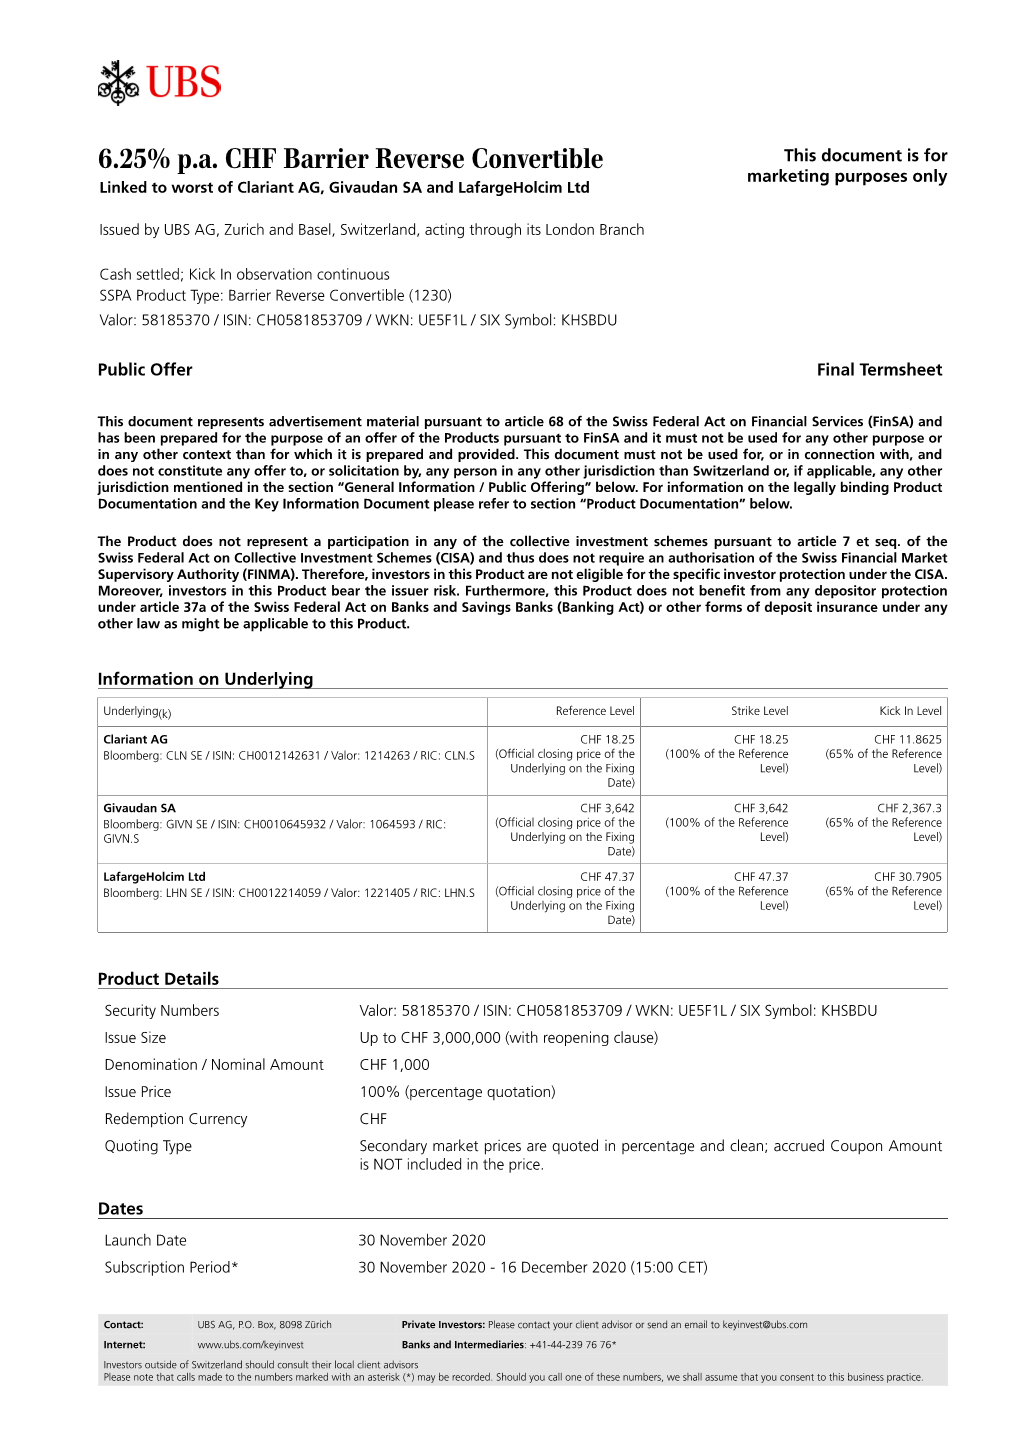 6.25% P.A. CHF Barrier Reverse Convertible This Document Is for Marketing Purposes Only Linked to Worst of Clariant AG, Givaudan SA and Lafargeholcim Ltd